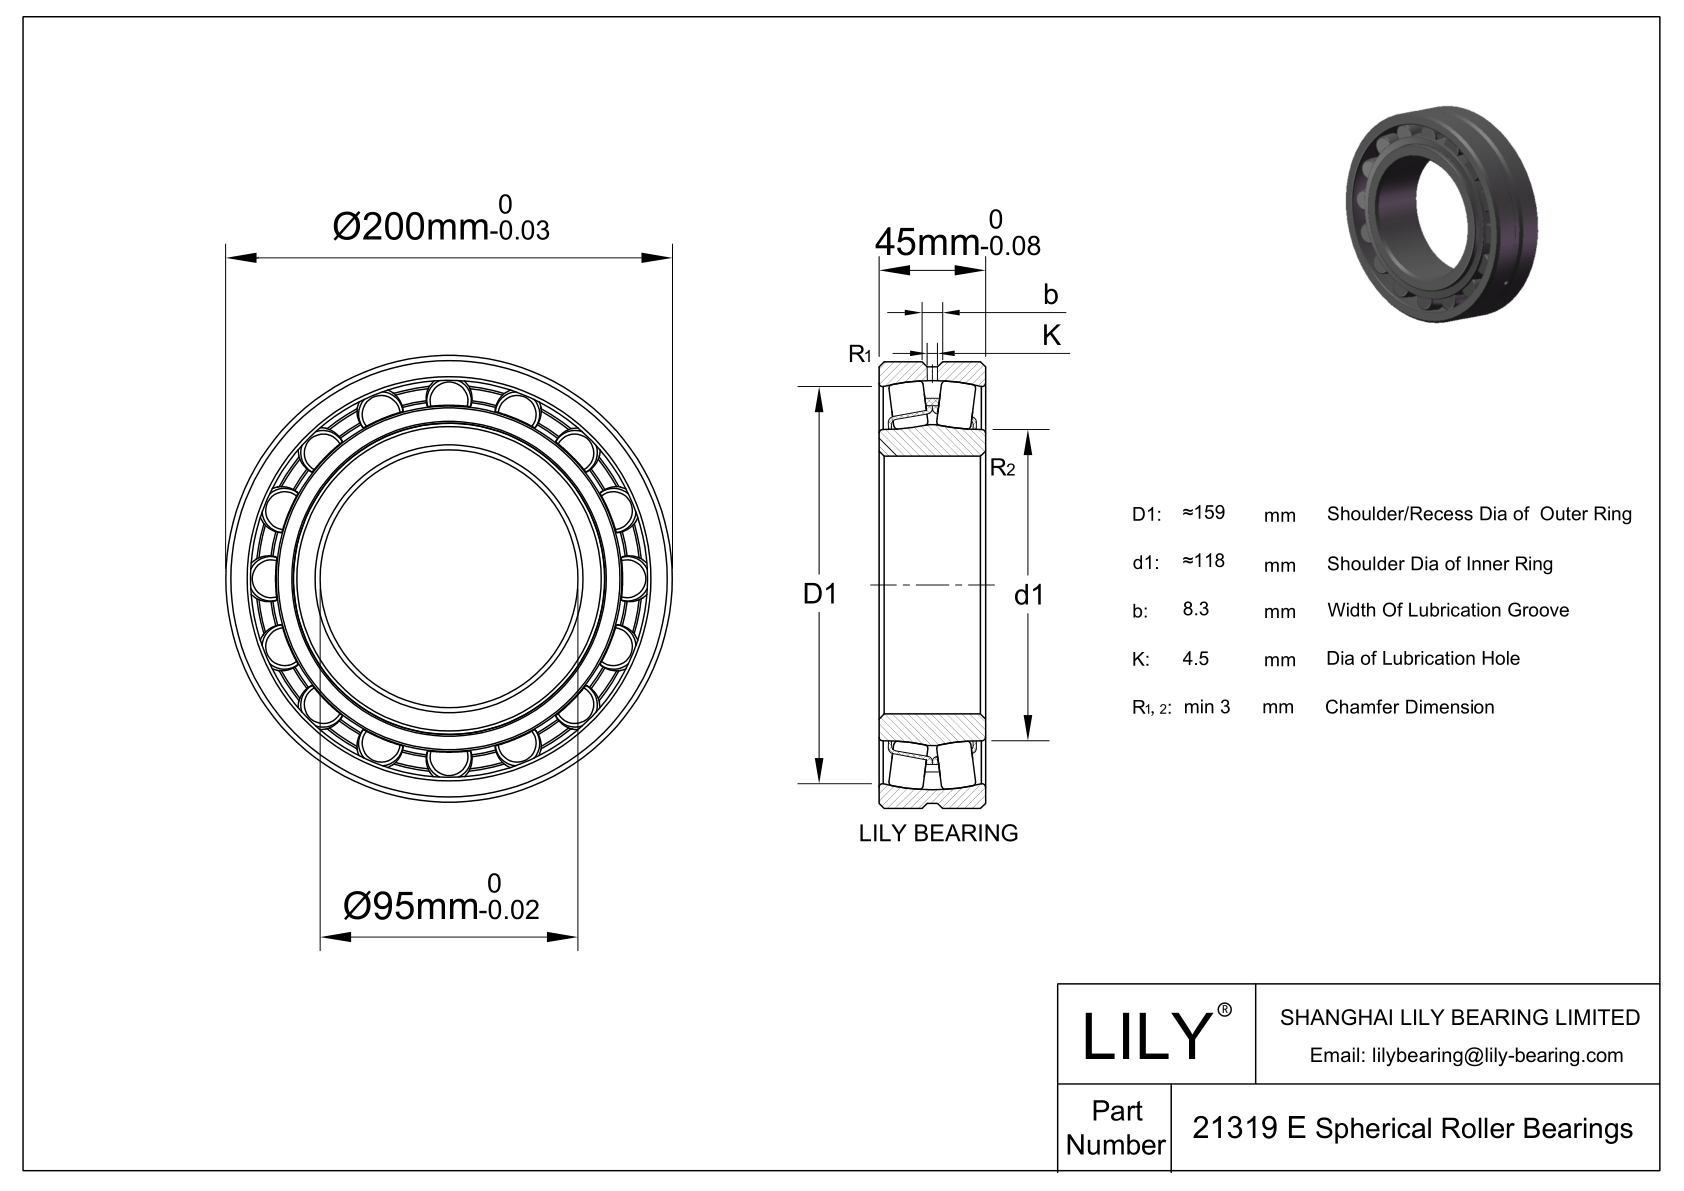 21319 E Double Row Spherical Roller Bearing cad drawing